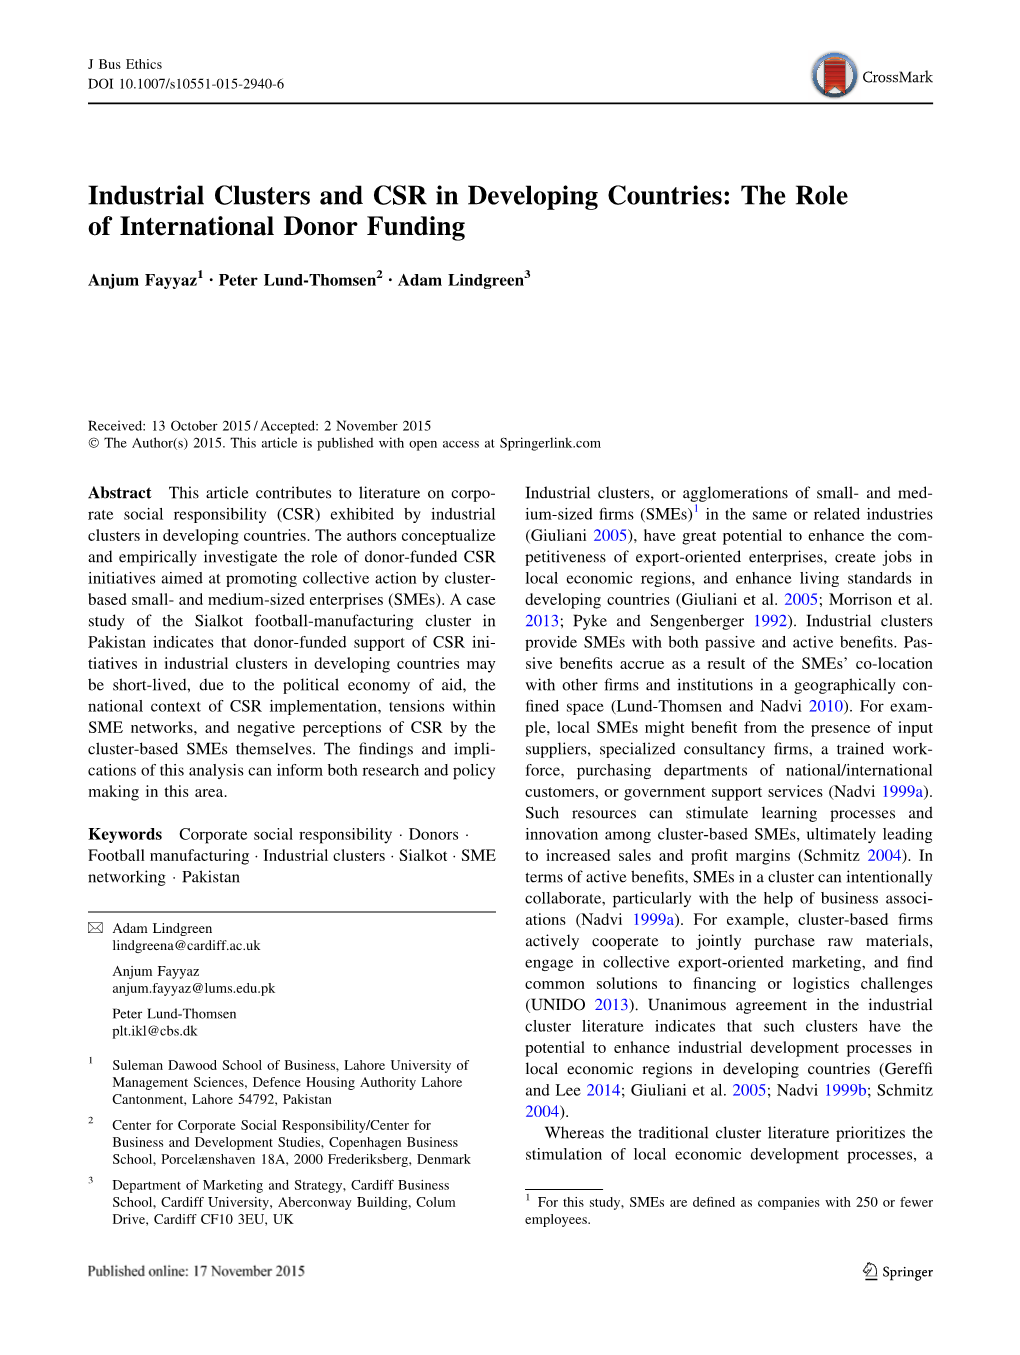 Industrial Clusters and CSR in Developing Countries: the Role of International Donor Funding